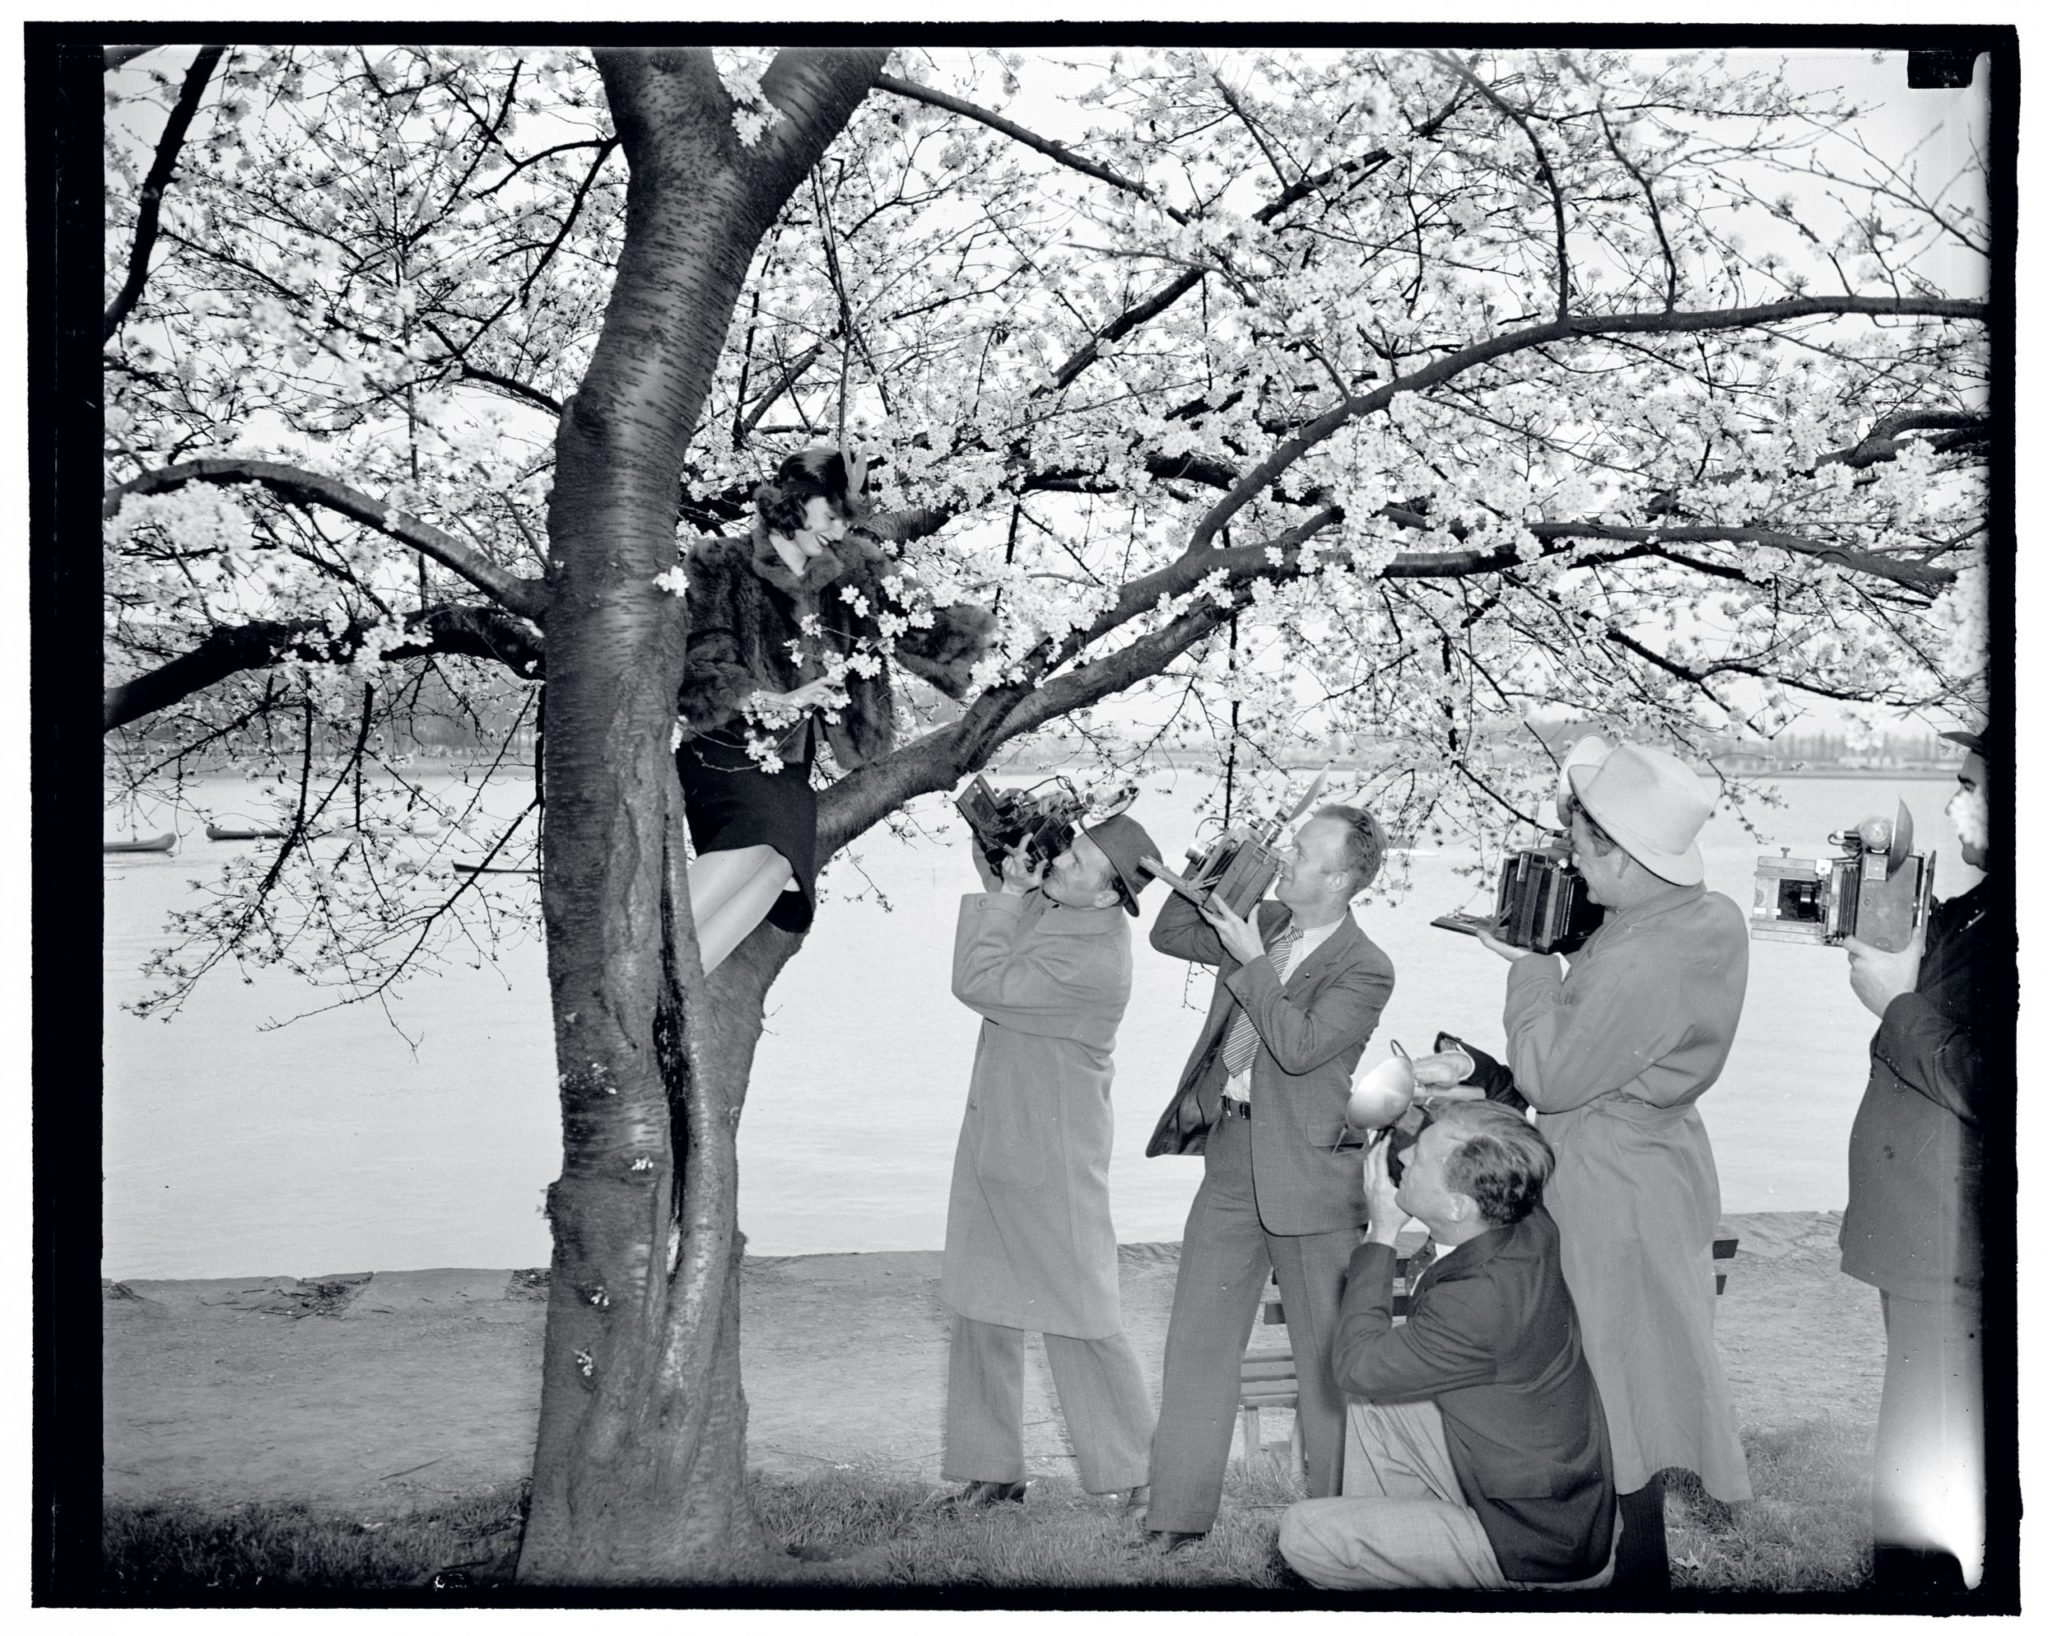 Check Out These Amazing Vintage Cherry Blossom Photos